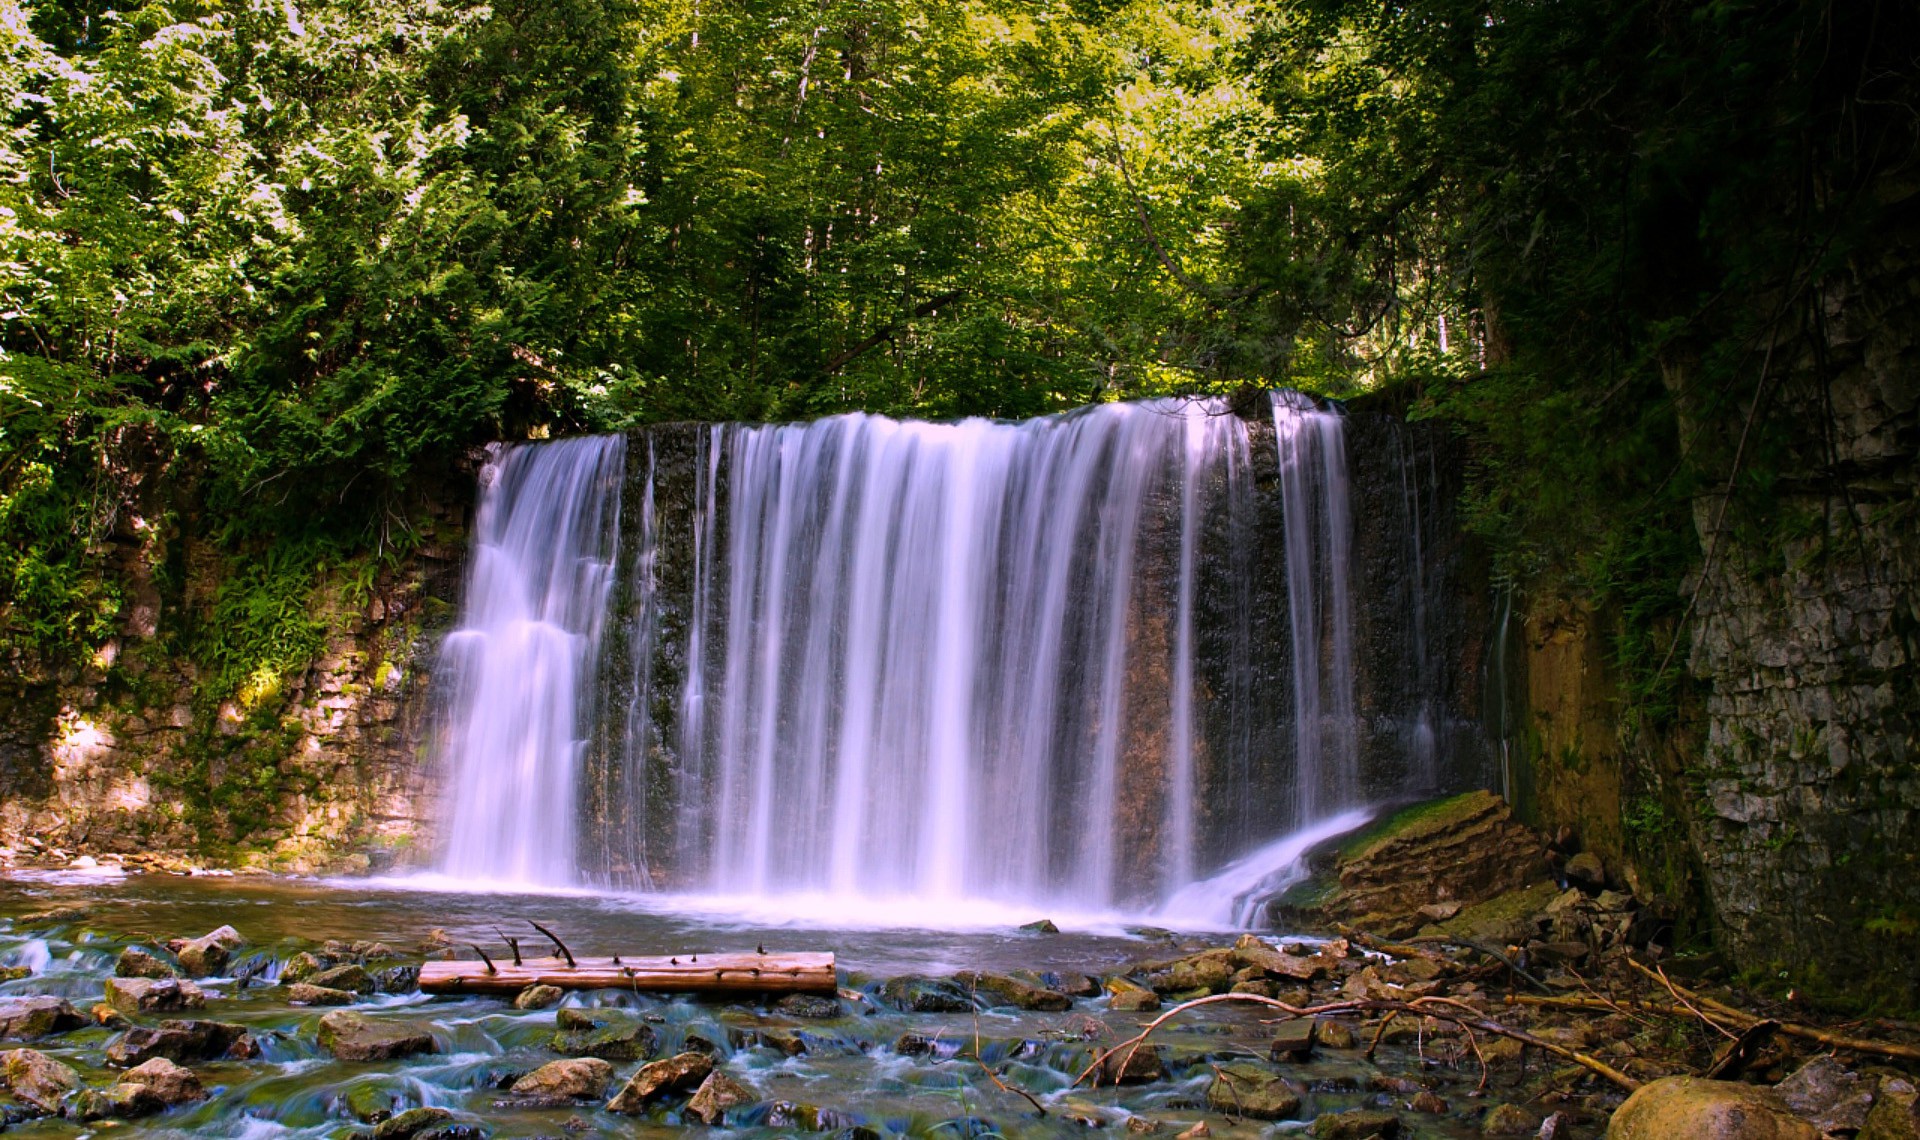 Hd Wallpapers, Flowers, Nature Images, Free Download - Waterfall - HD Wallpaper 